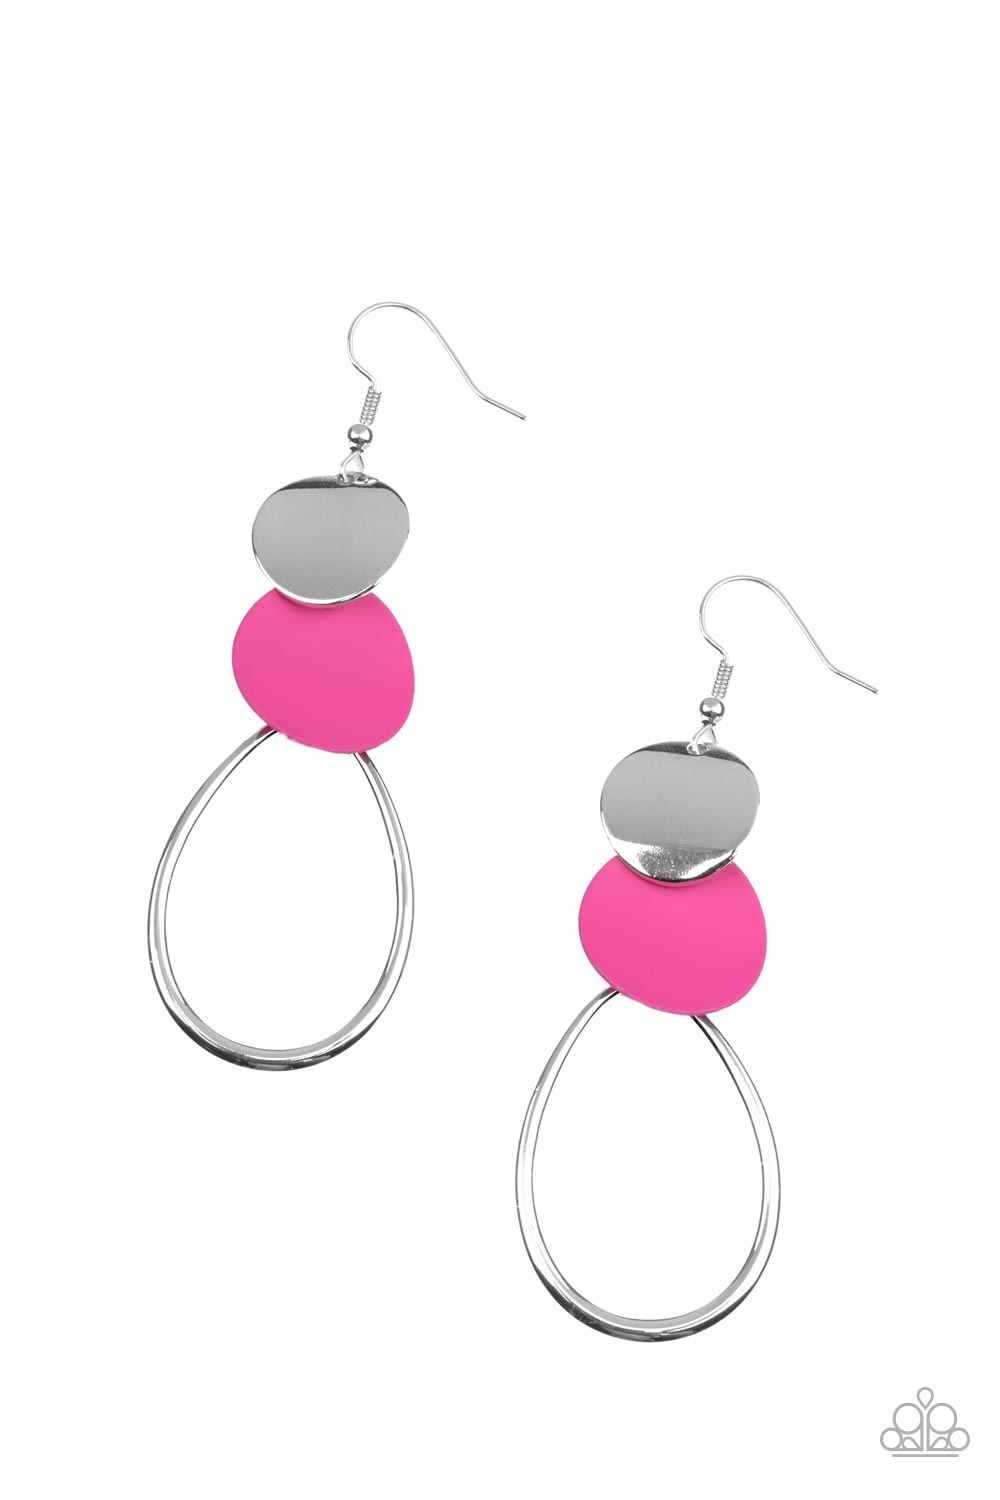 Retro Reception Pink Earring - Paparazzi Accessories  Featuring slightly bent surfaces, a shiny silver and Fuchsia Fedora matte disc links with an airy silver teardrop frame, resulting in a retro lure. Earring attaches to a standard fishhook fitting.  Featured inside The Preview at GLOW! Sold as one pair of earrings.